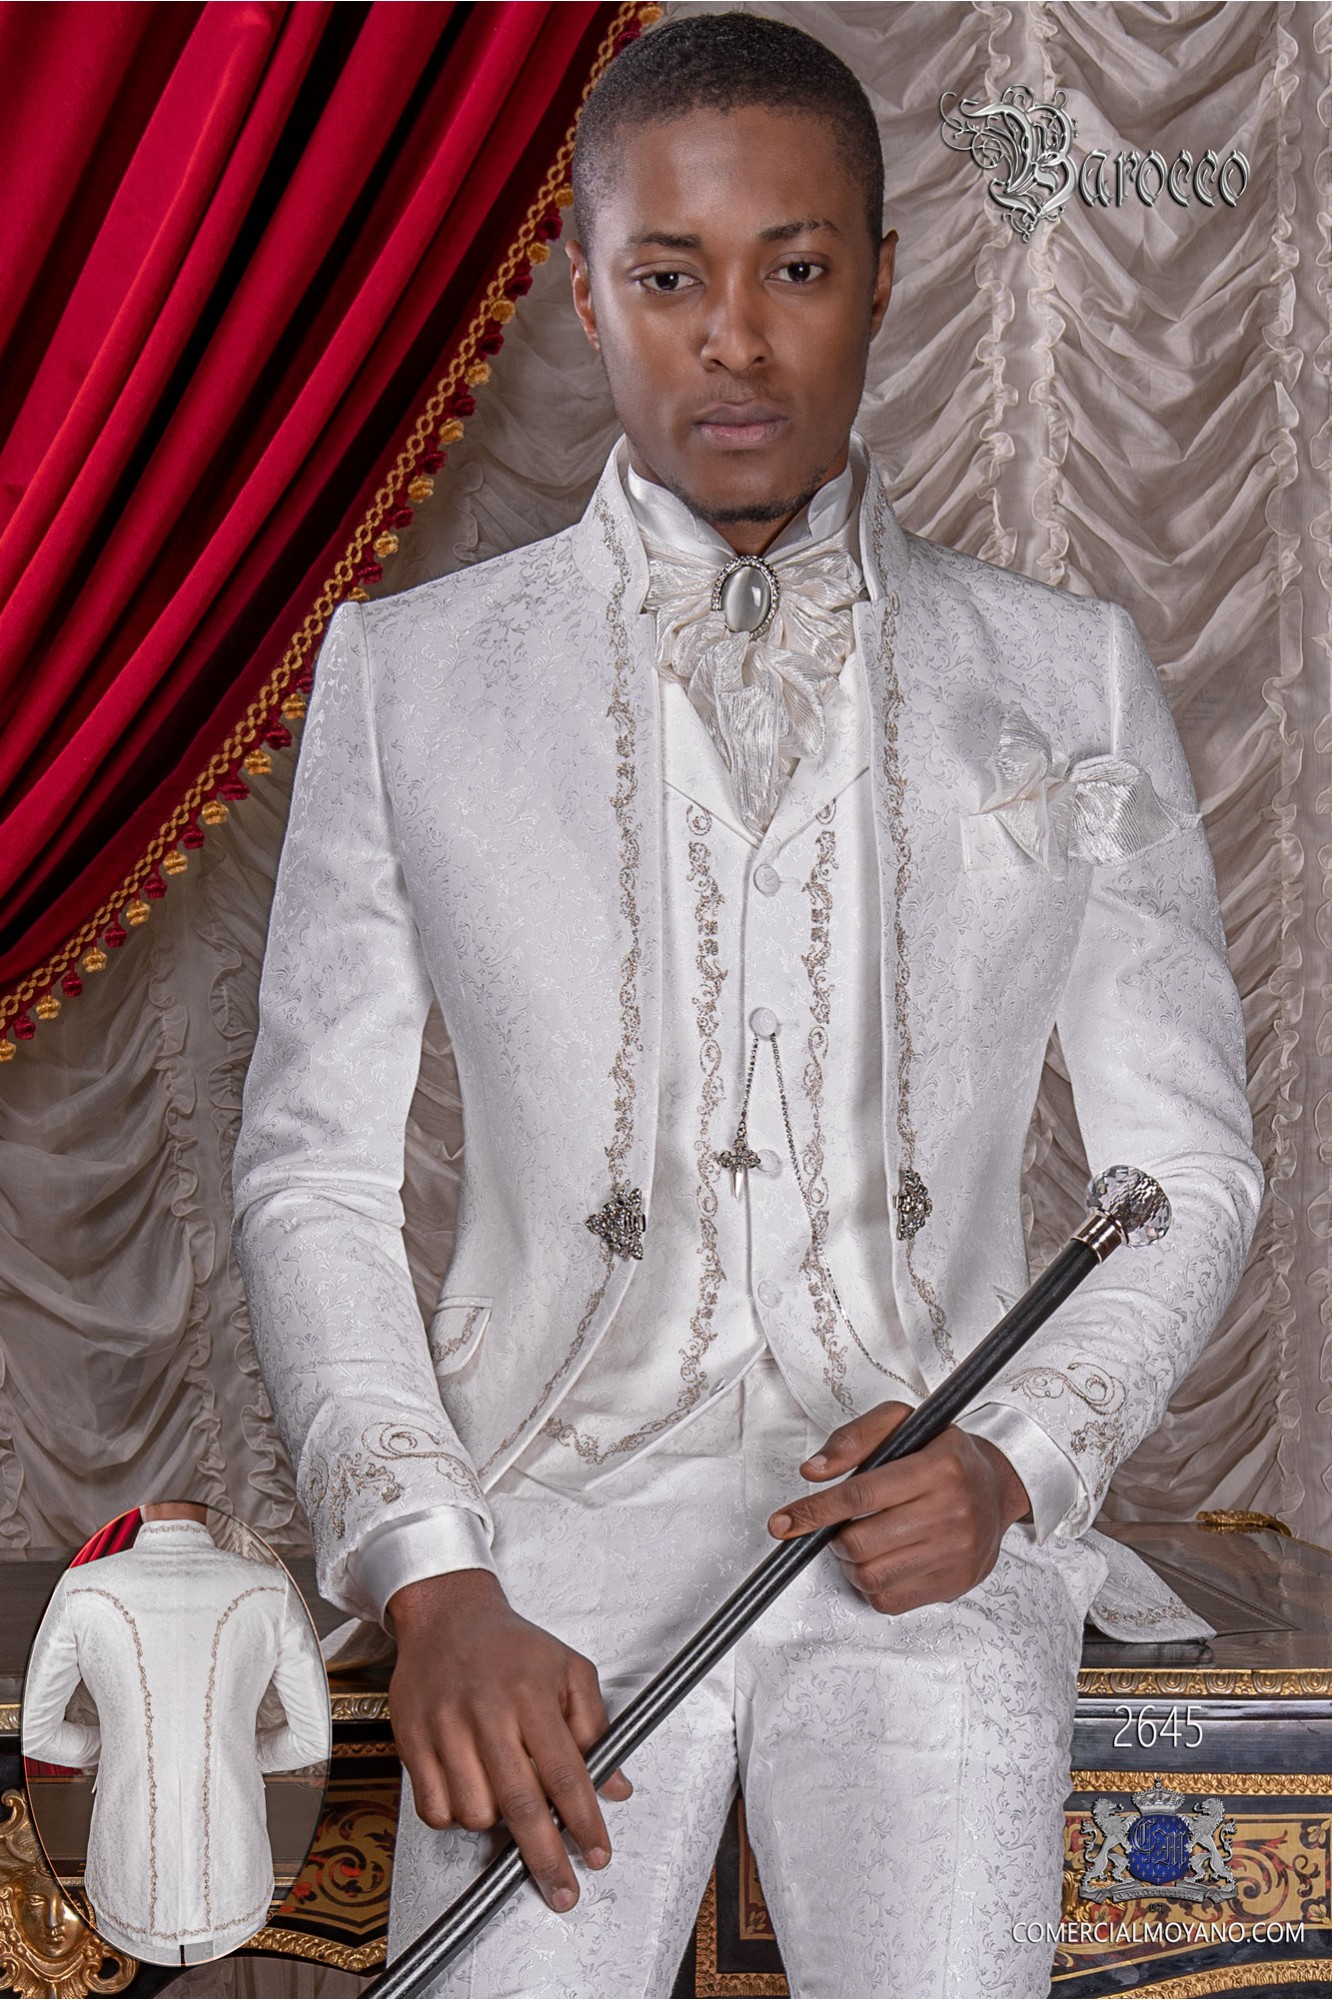 Baroque groom suit, vintage mao collar frock coat in white jacquard fabric with silver embroidery and crystal clasp model 2645 Mario Moyano